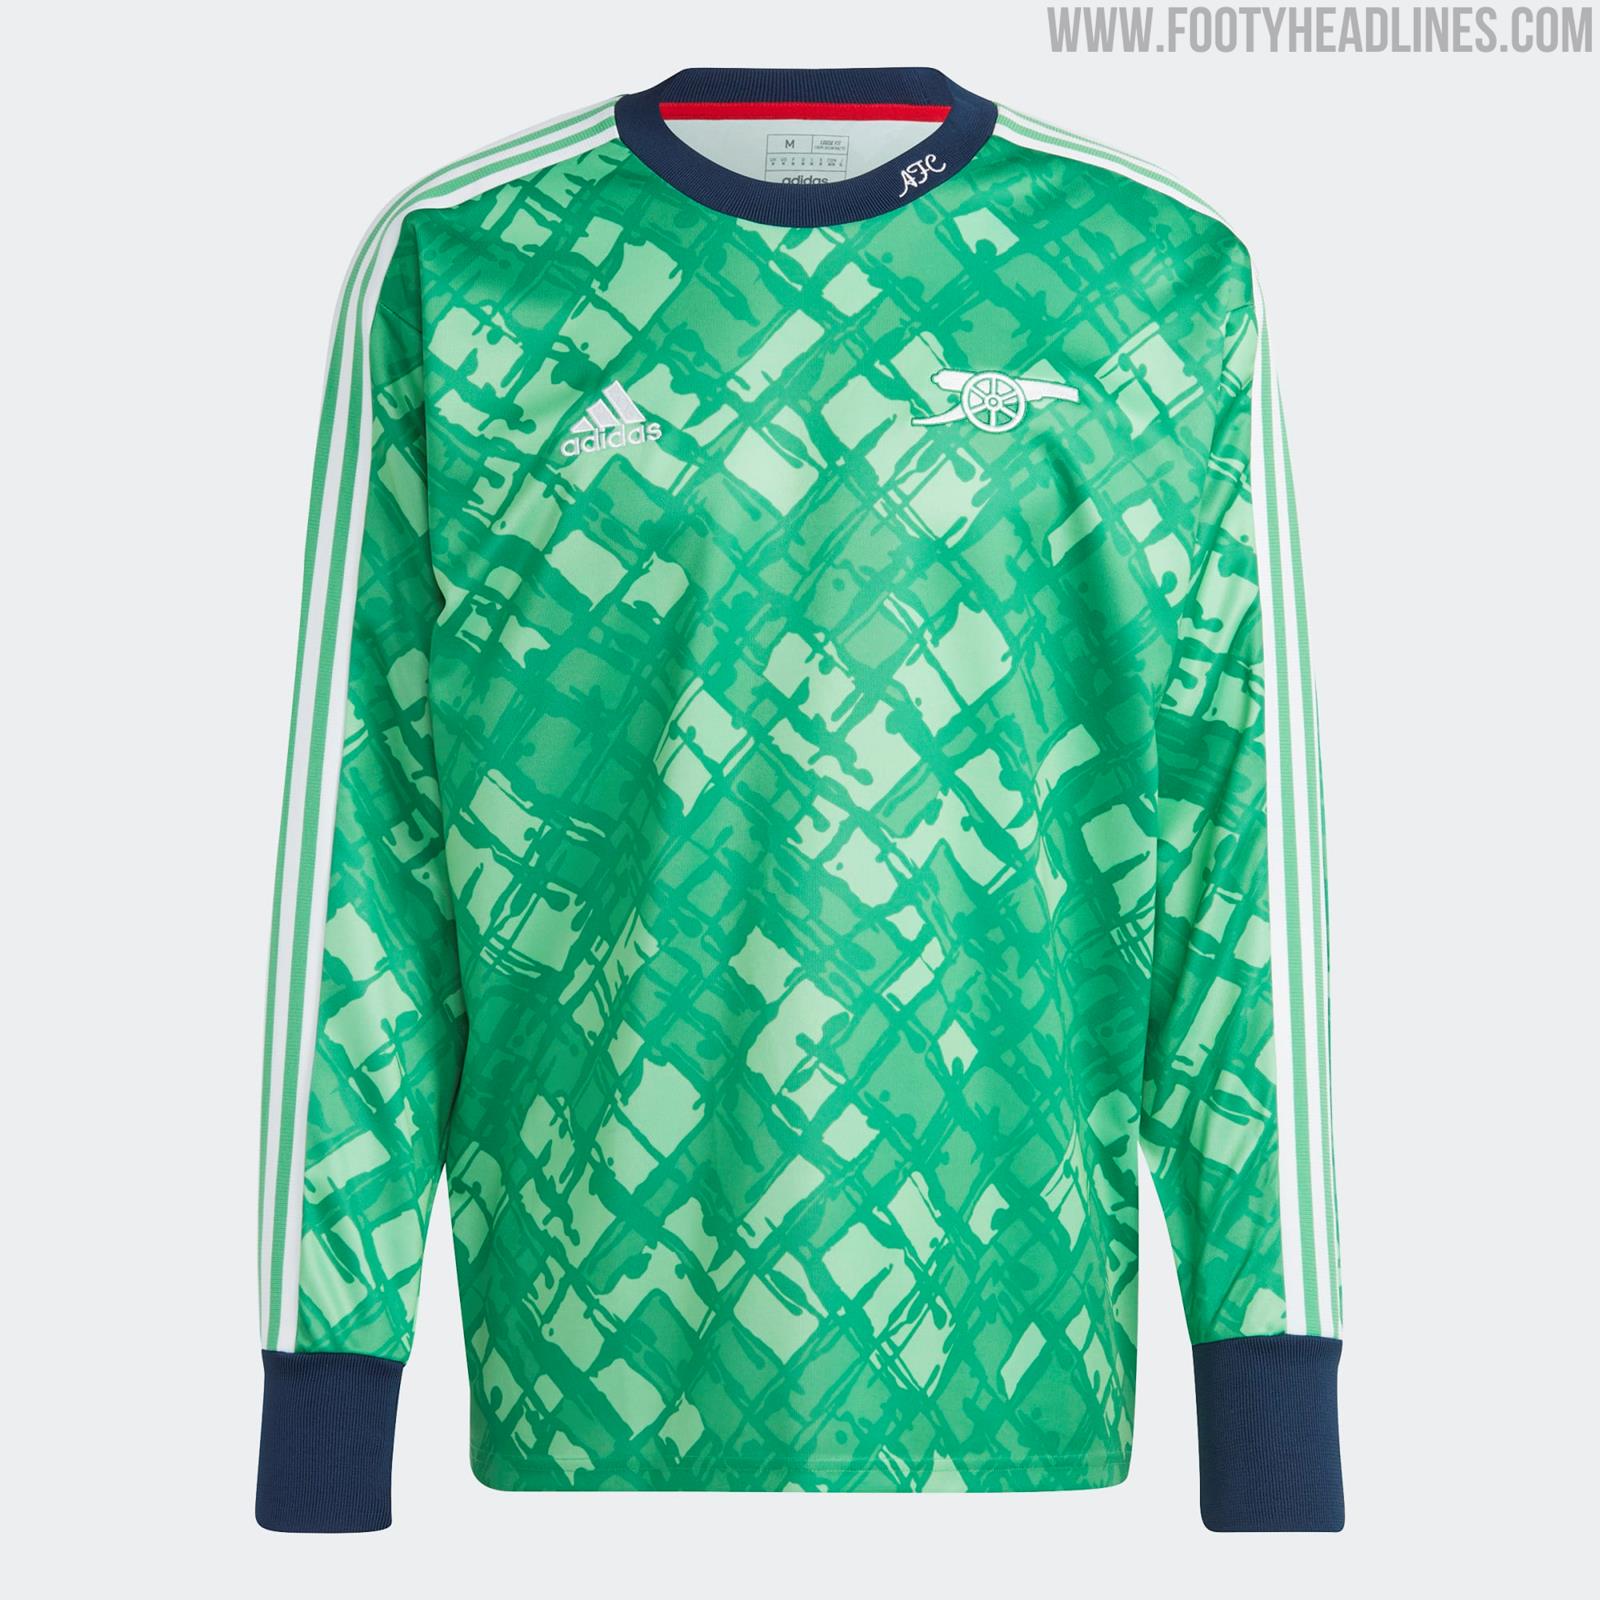 adidas Release Retro Icon Goalkeeper Jersey Collection - SoccerBible